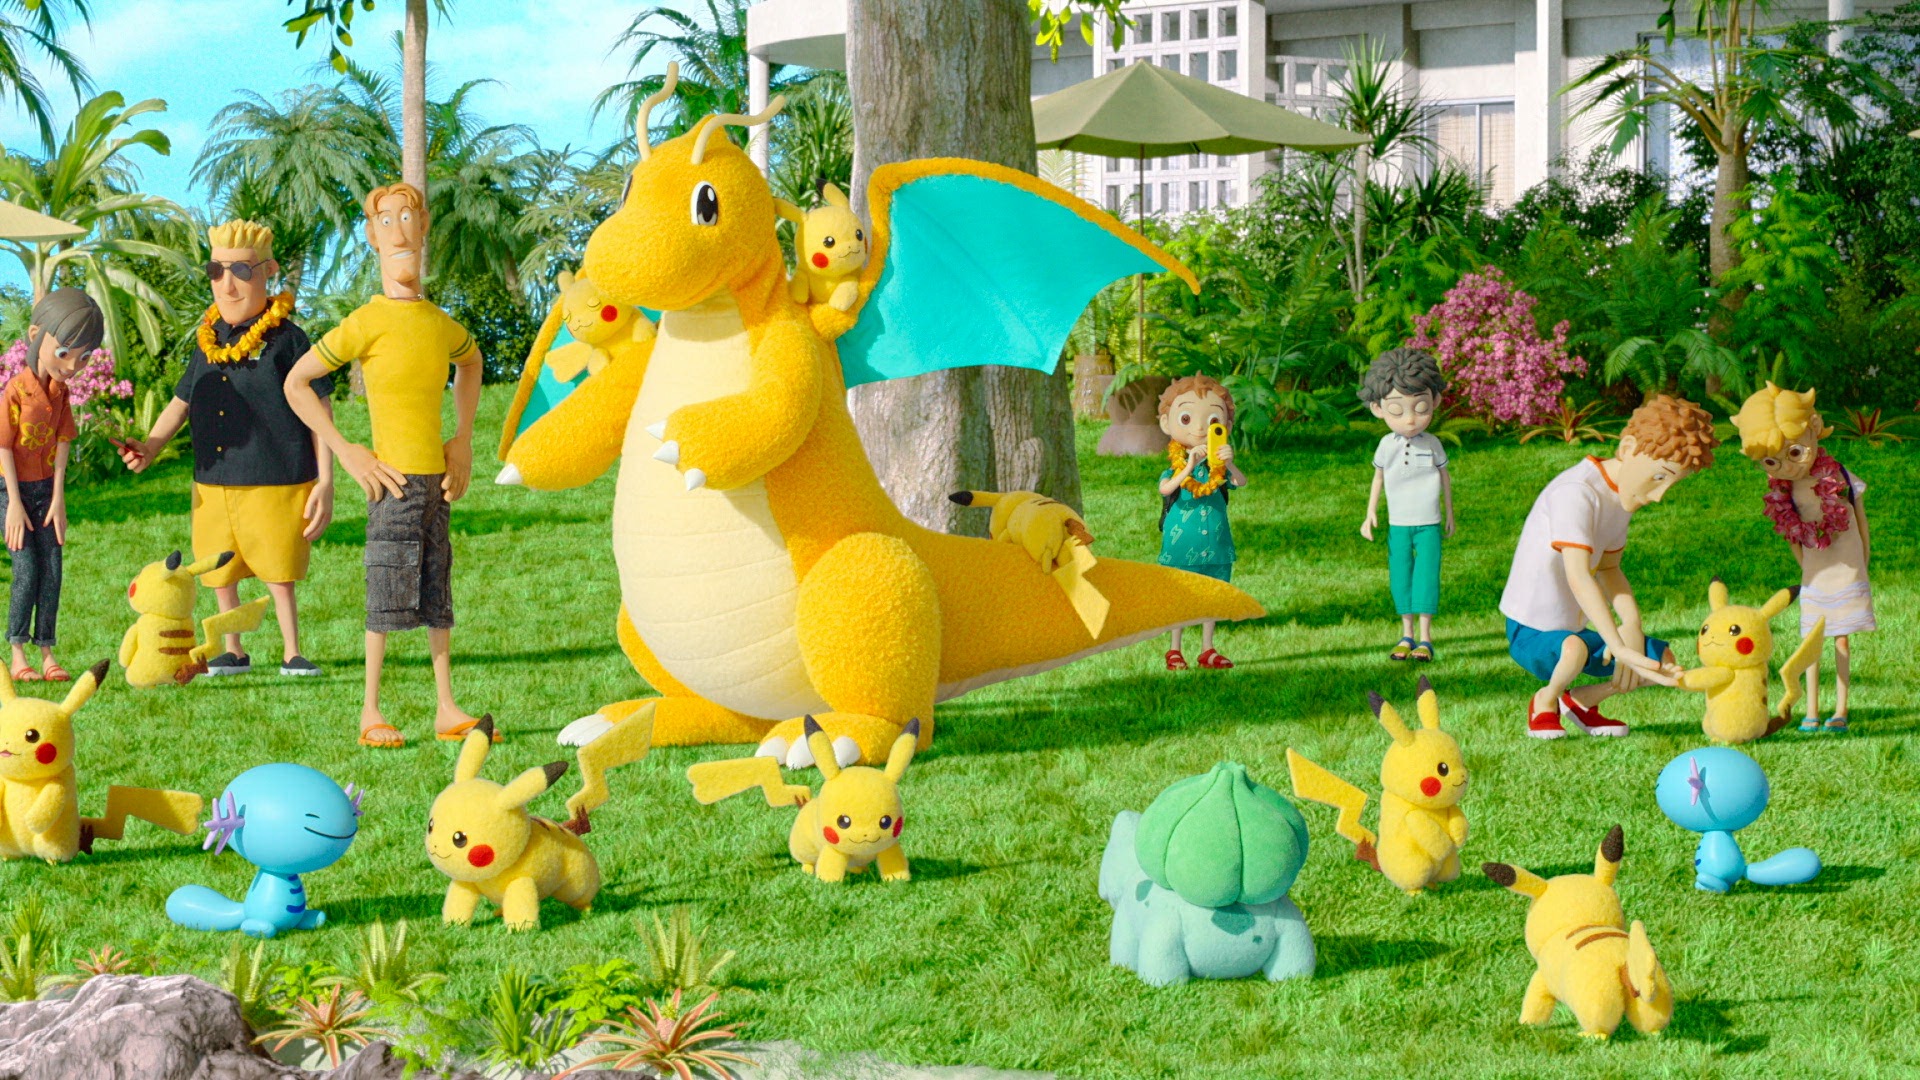 A bunch of humans hanging out with Pokemon on a lawn in the stop-motion series Pokémon Concierge.